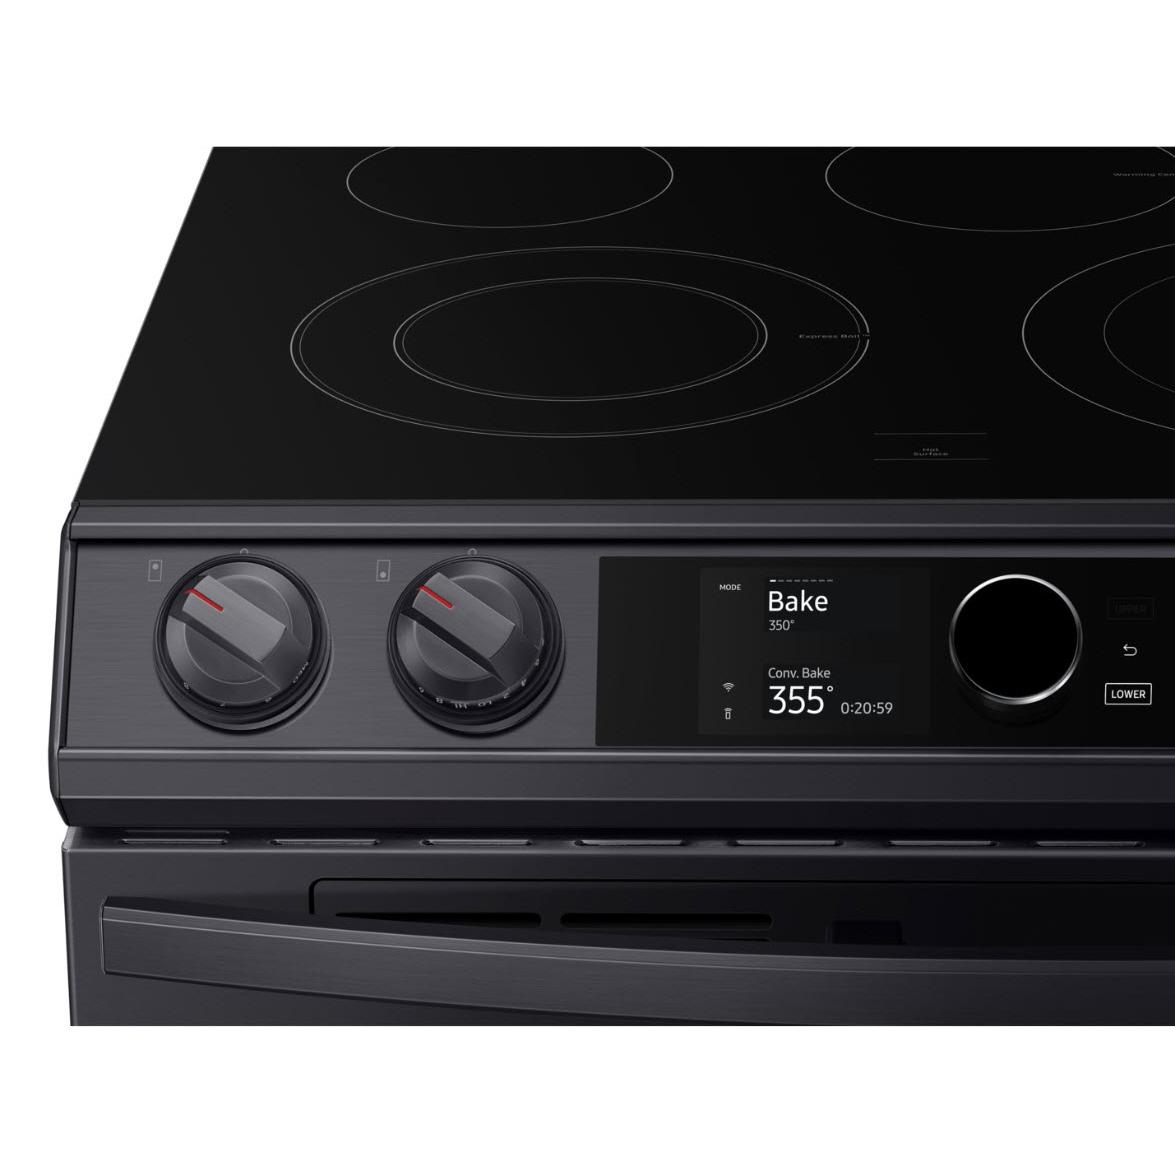 Samsung 30-inch Slide-in Electric Range with Wi-Fi Connectivity NE63T8751SG/AA